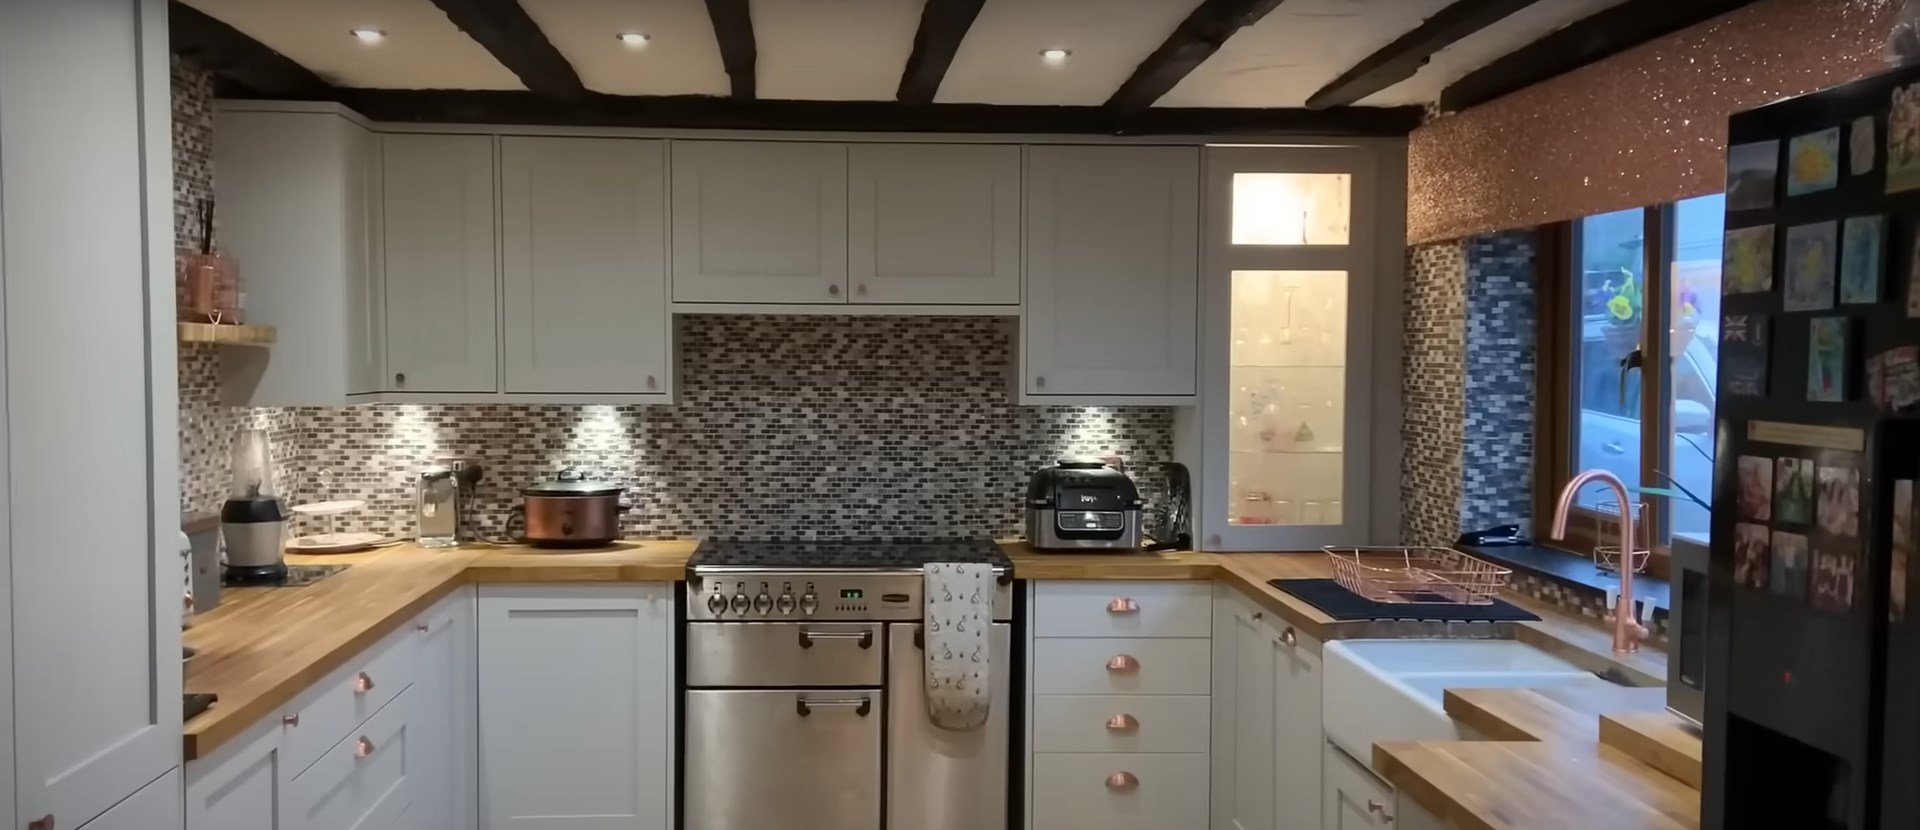 Open plan kitchen and dining room (Just-Knock Estate Agents)